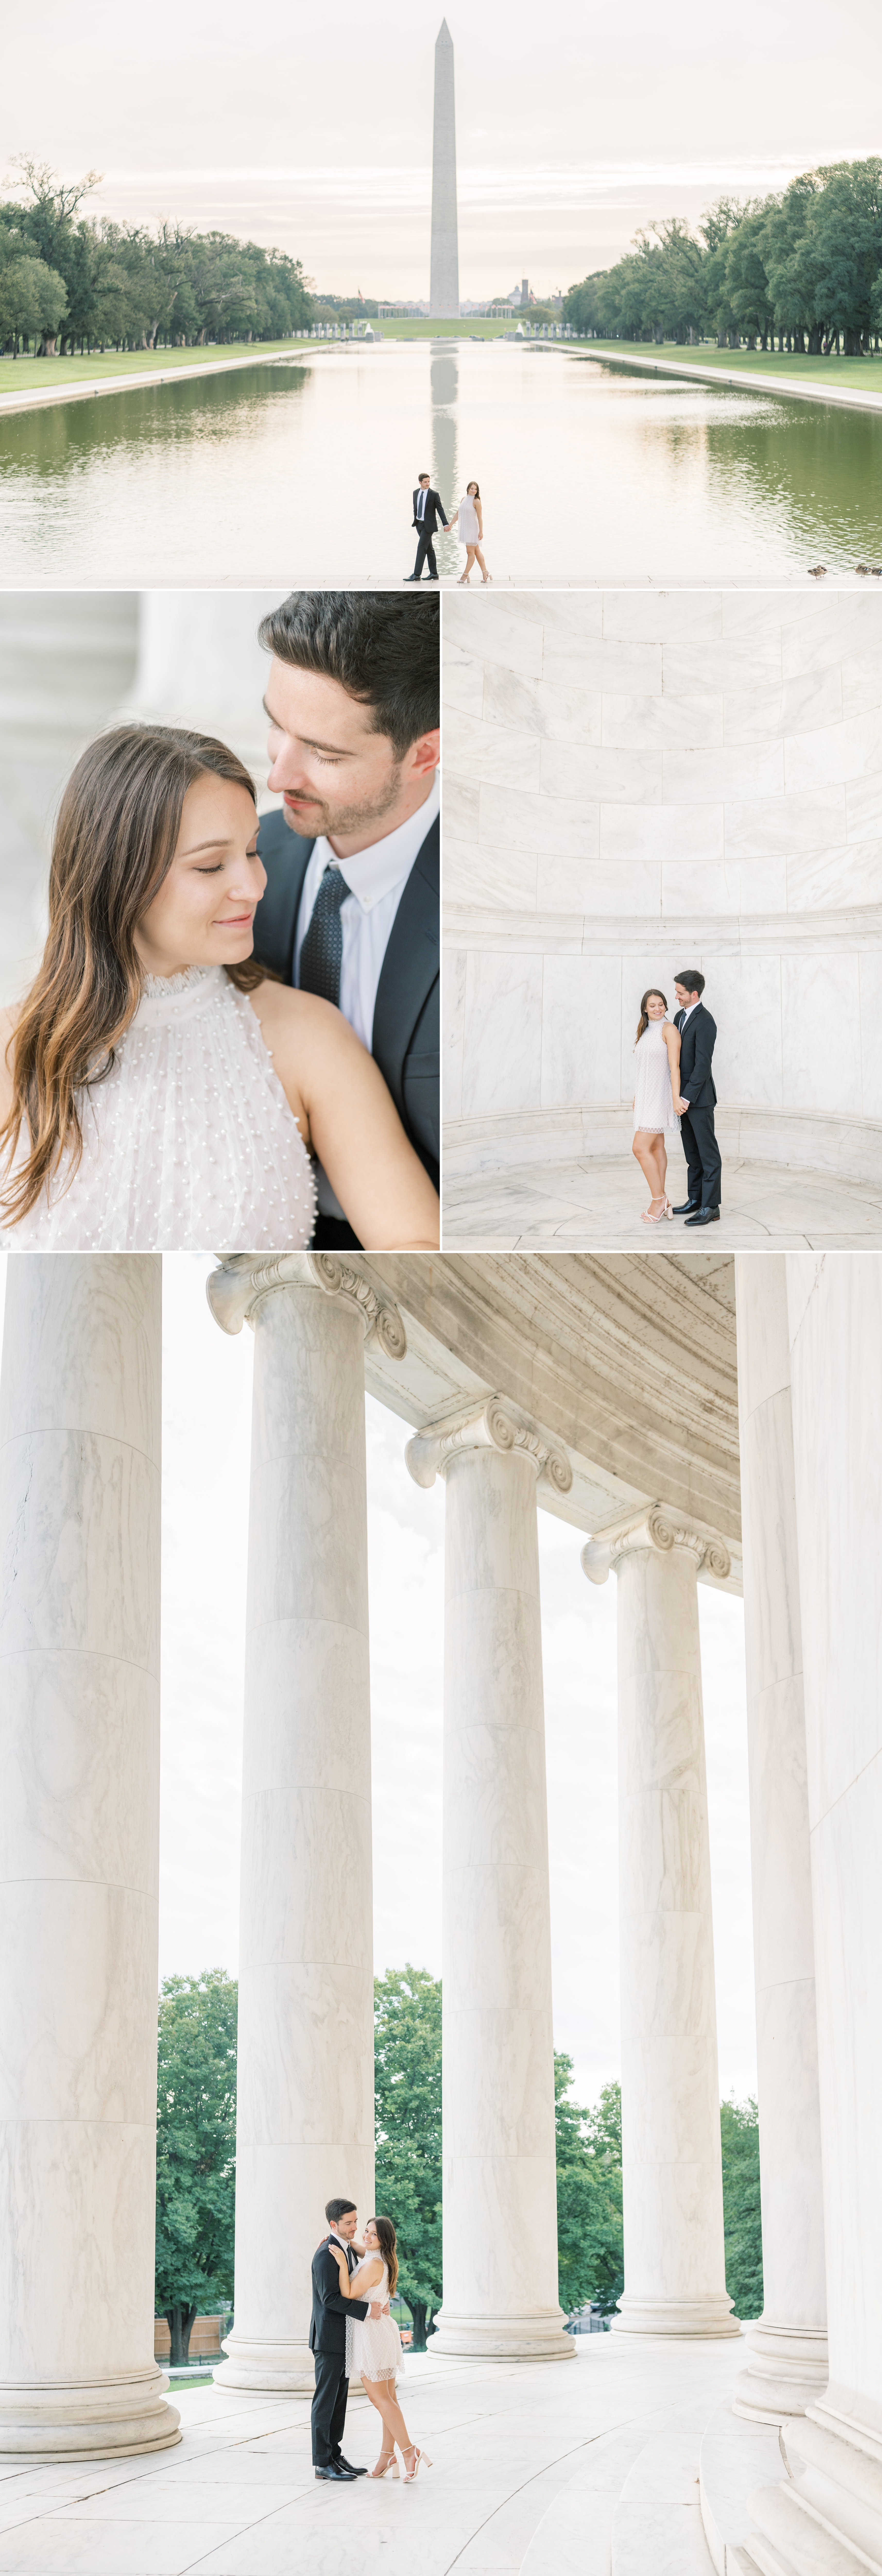 A romantic sunrise engagement session at the Jefferson Memorial in Washington, DC. Couple also visits the Constitution Gardens and Reflecting Pool.